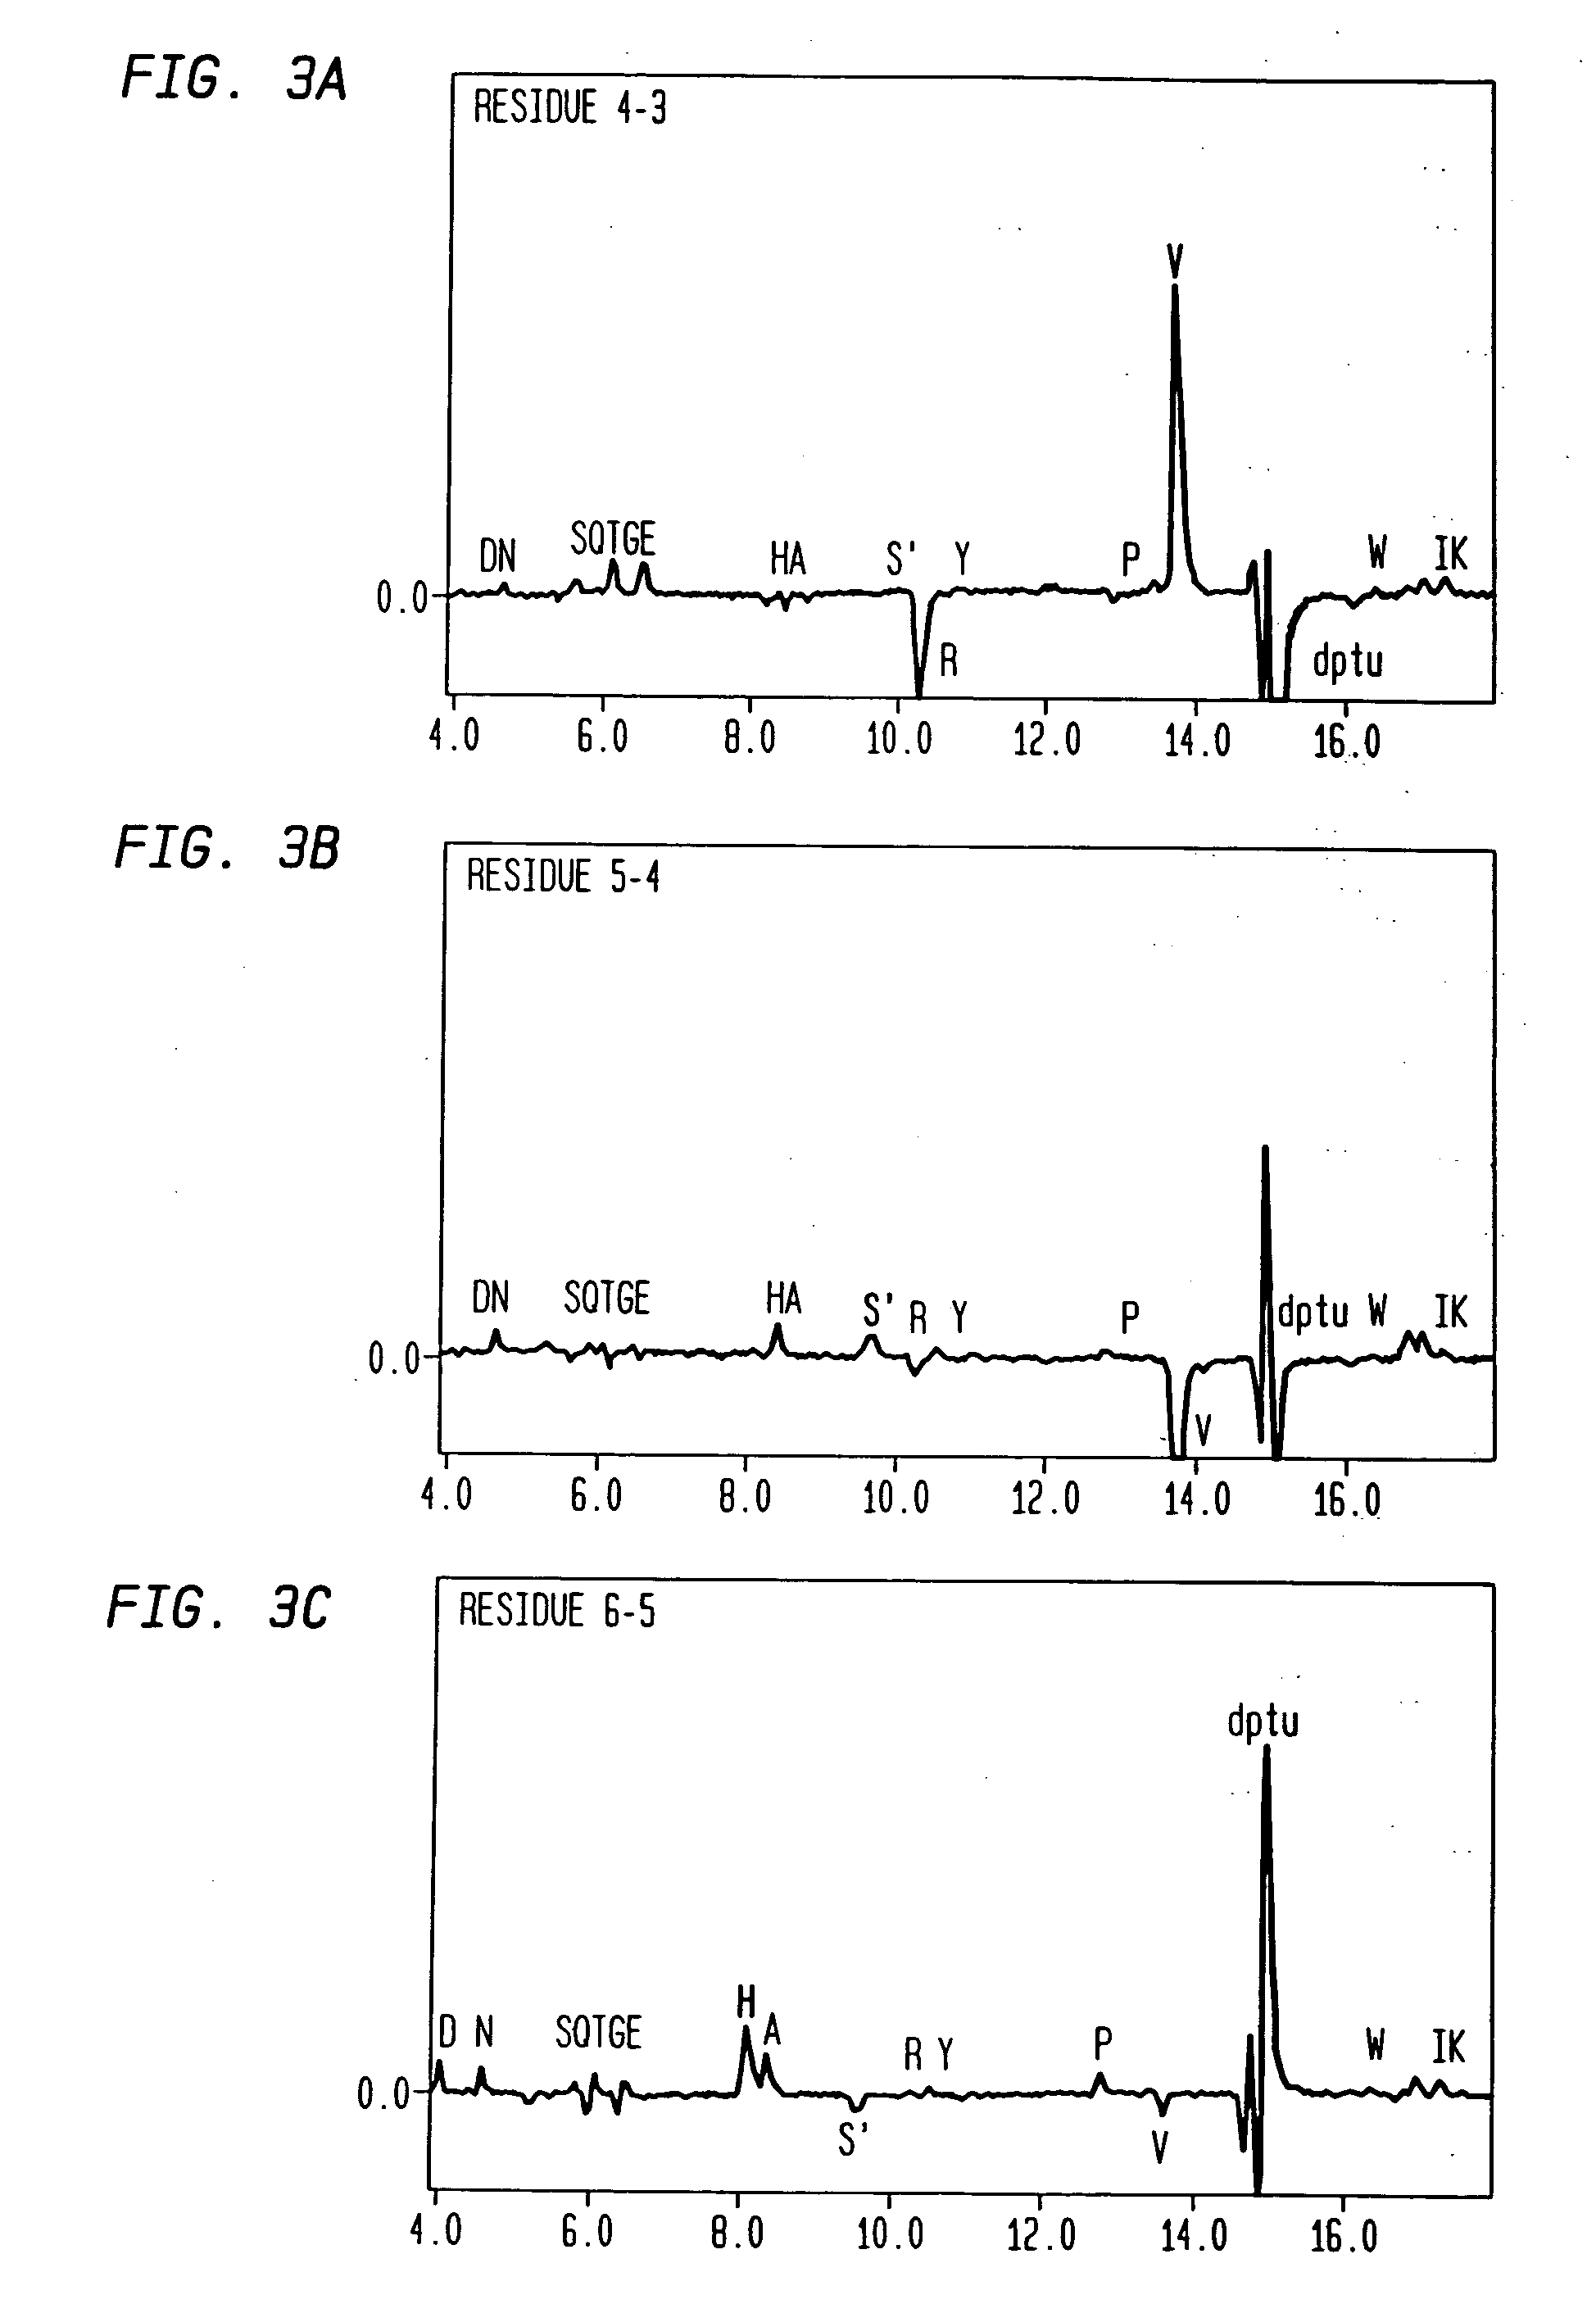 Surface display of selenocysteine-containing peptides